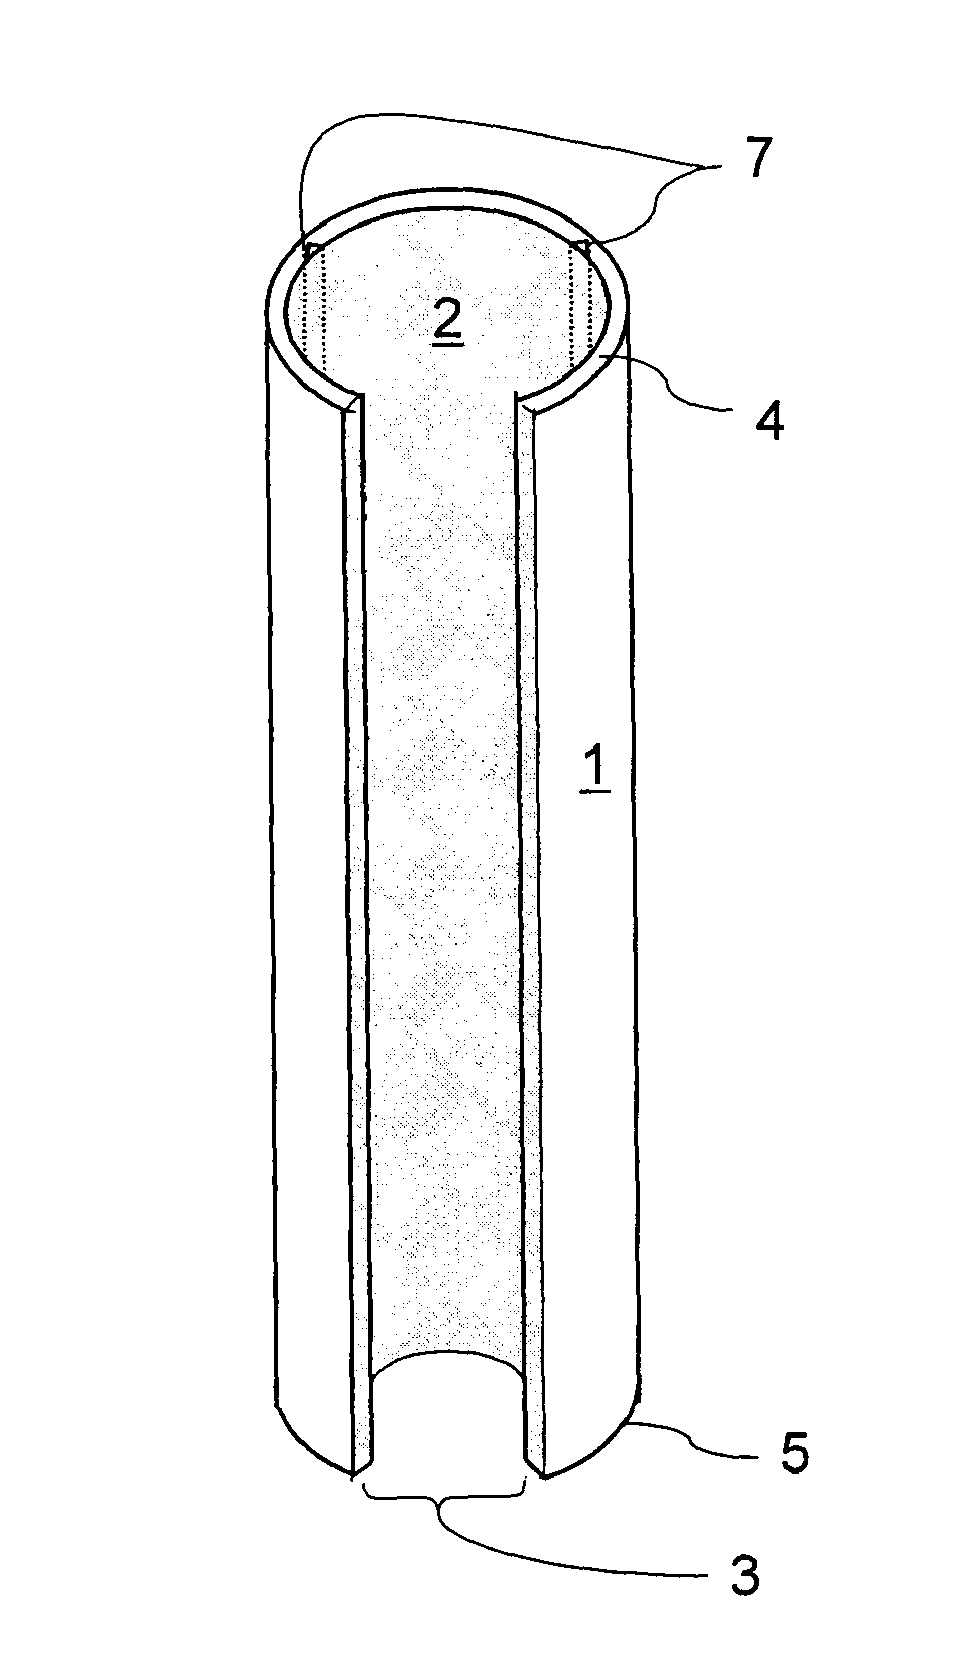 Encasement devices and methods for planting mangroves